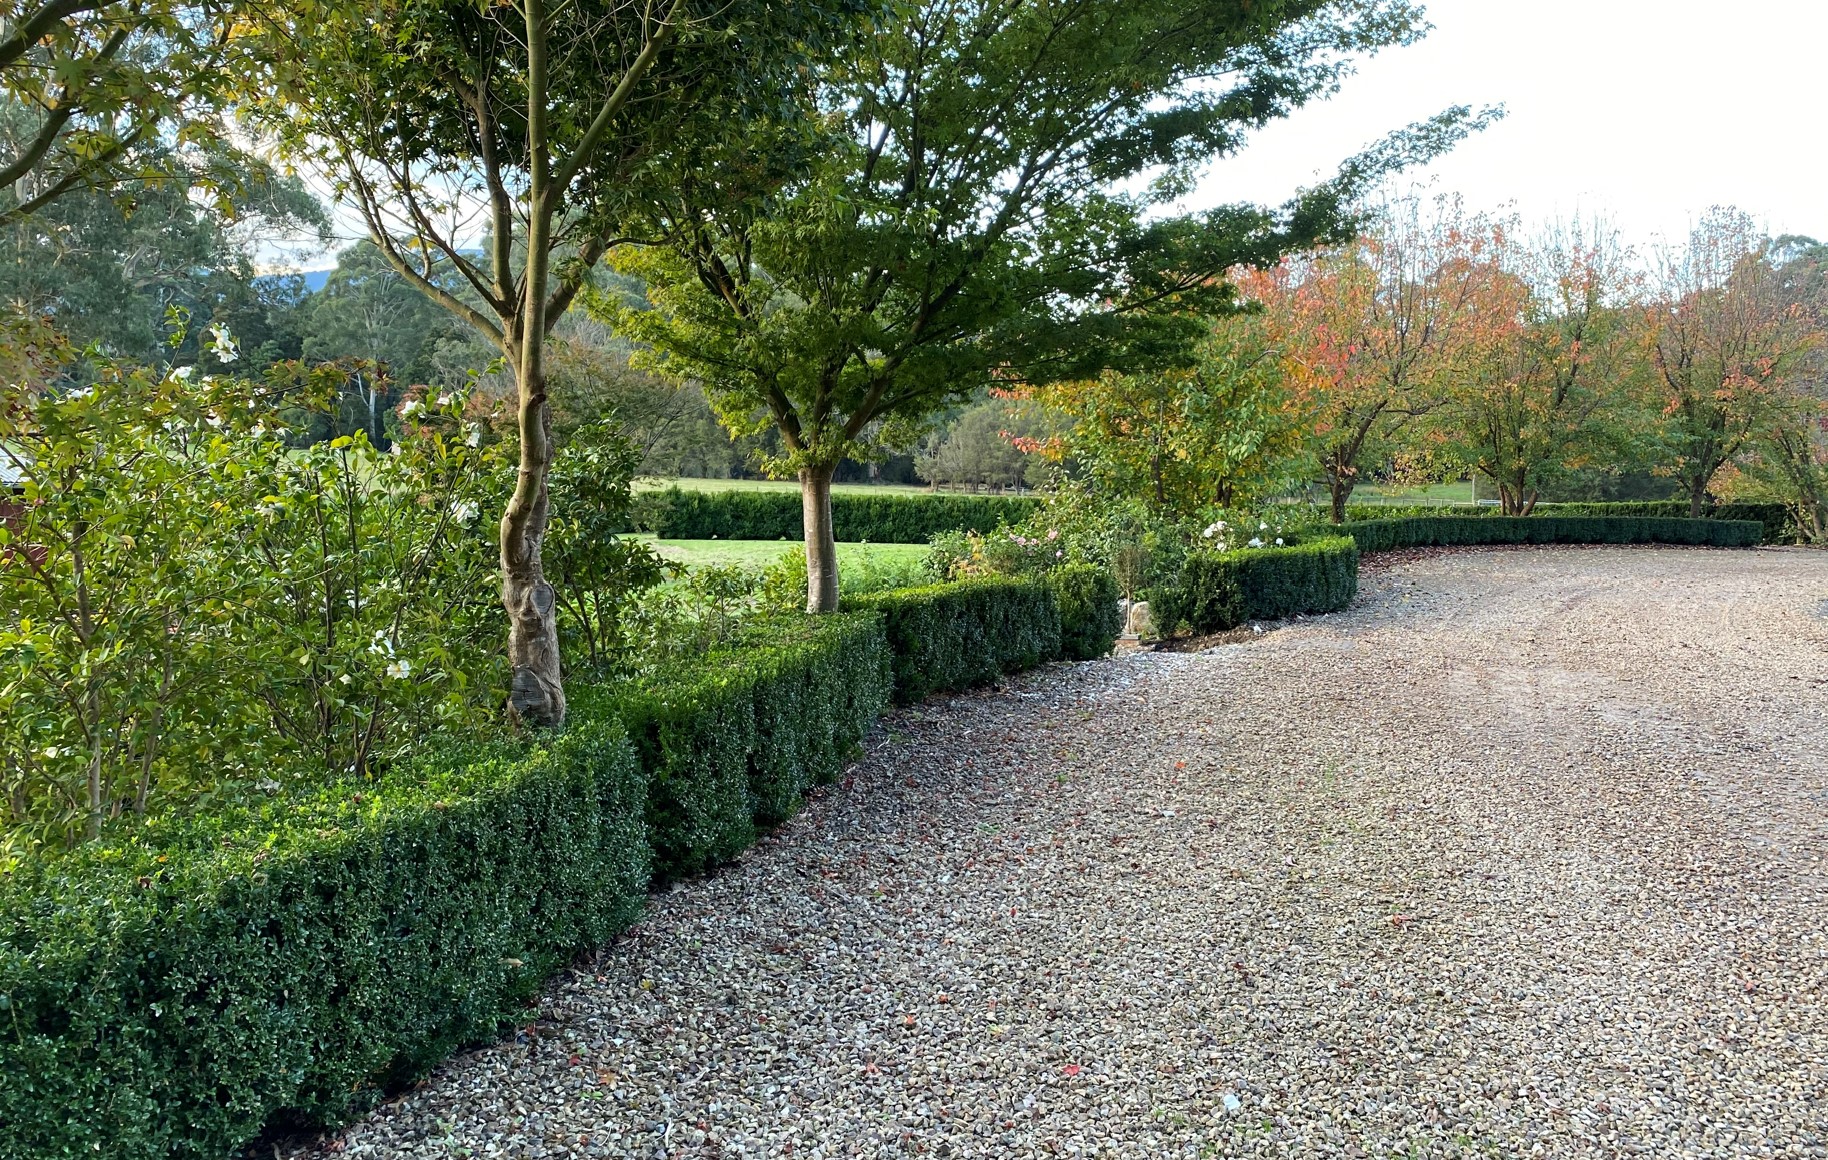 Box plants used in a small hedge to delineate a driveway